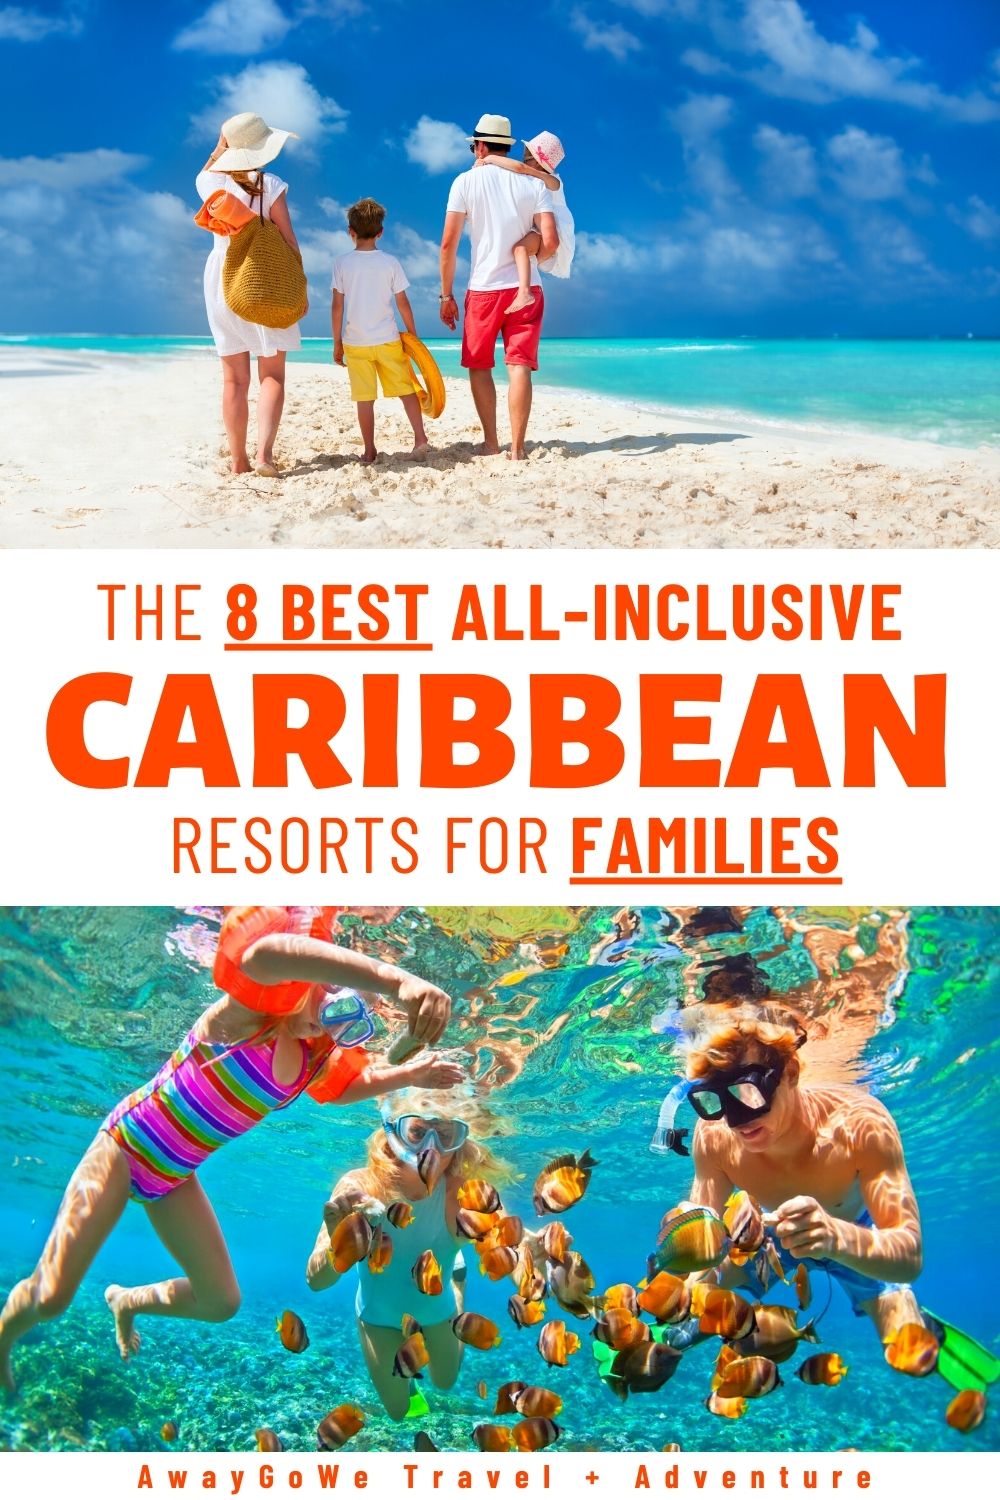 all-inclusive family-friendly resorts in the Caribbean